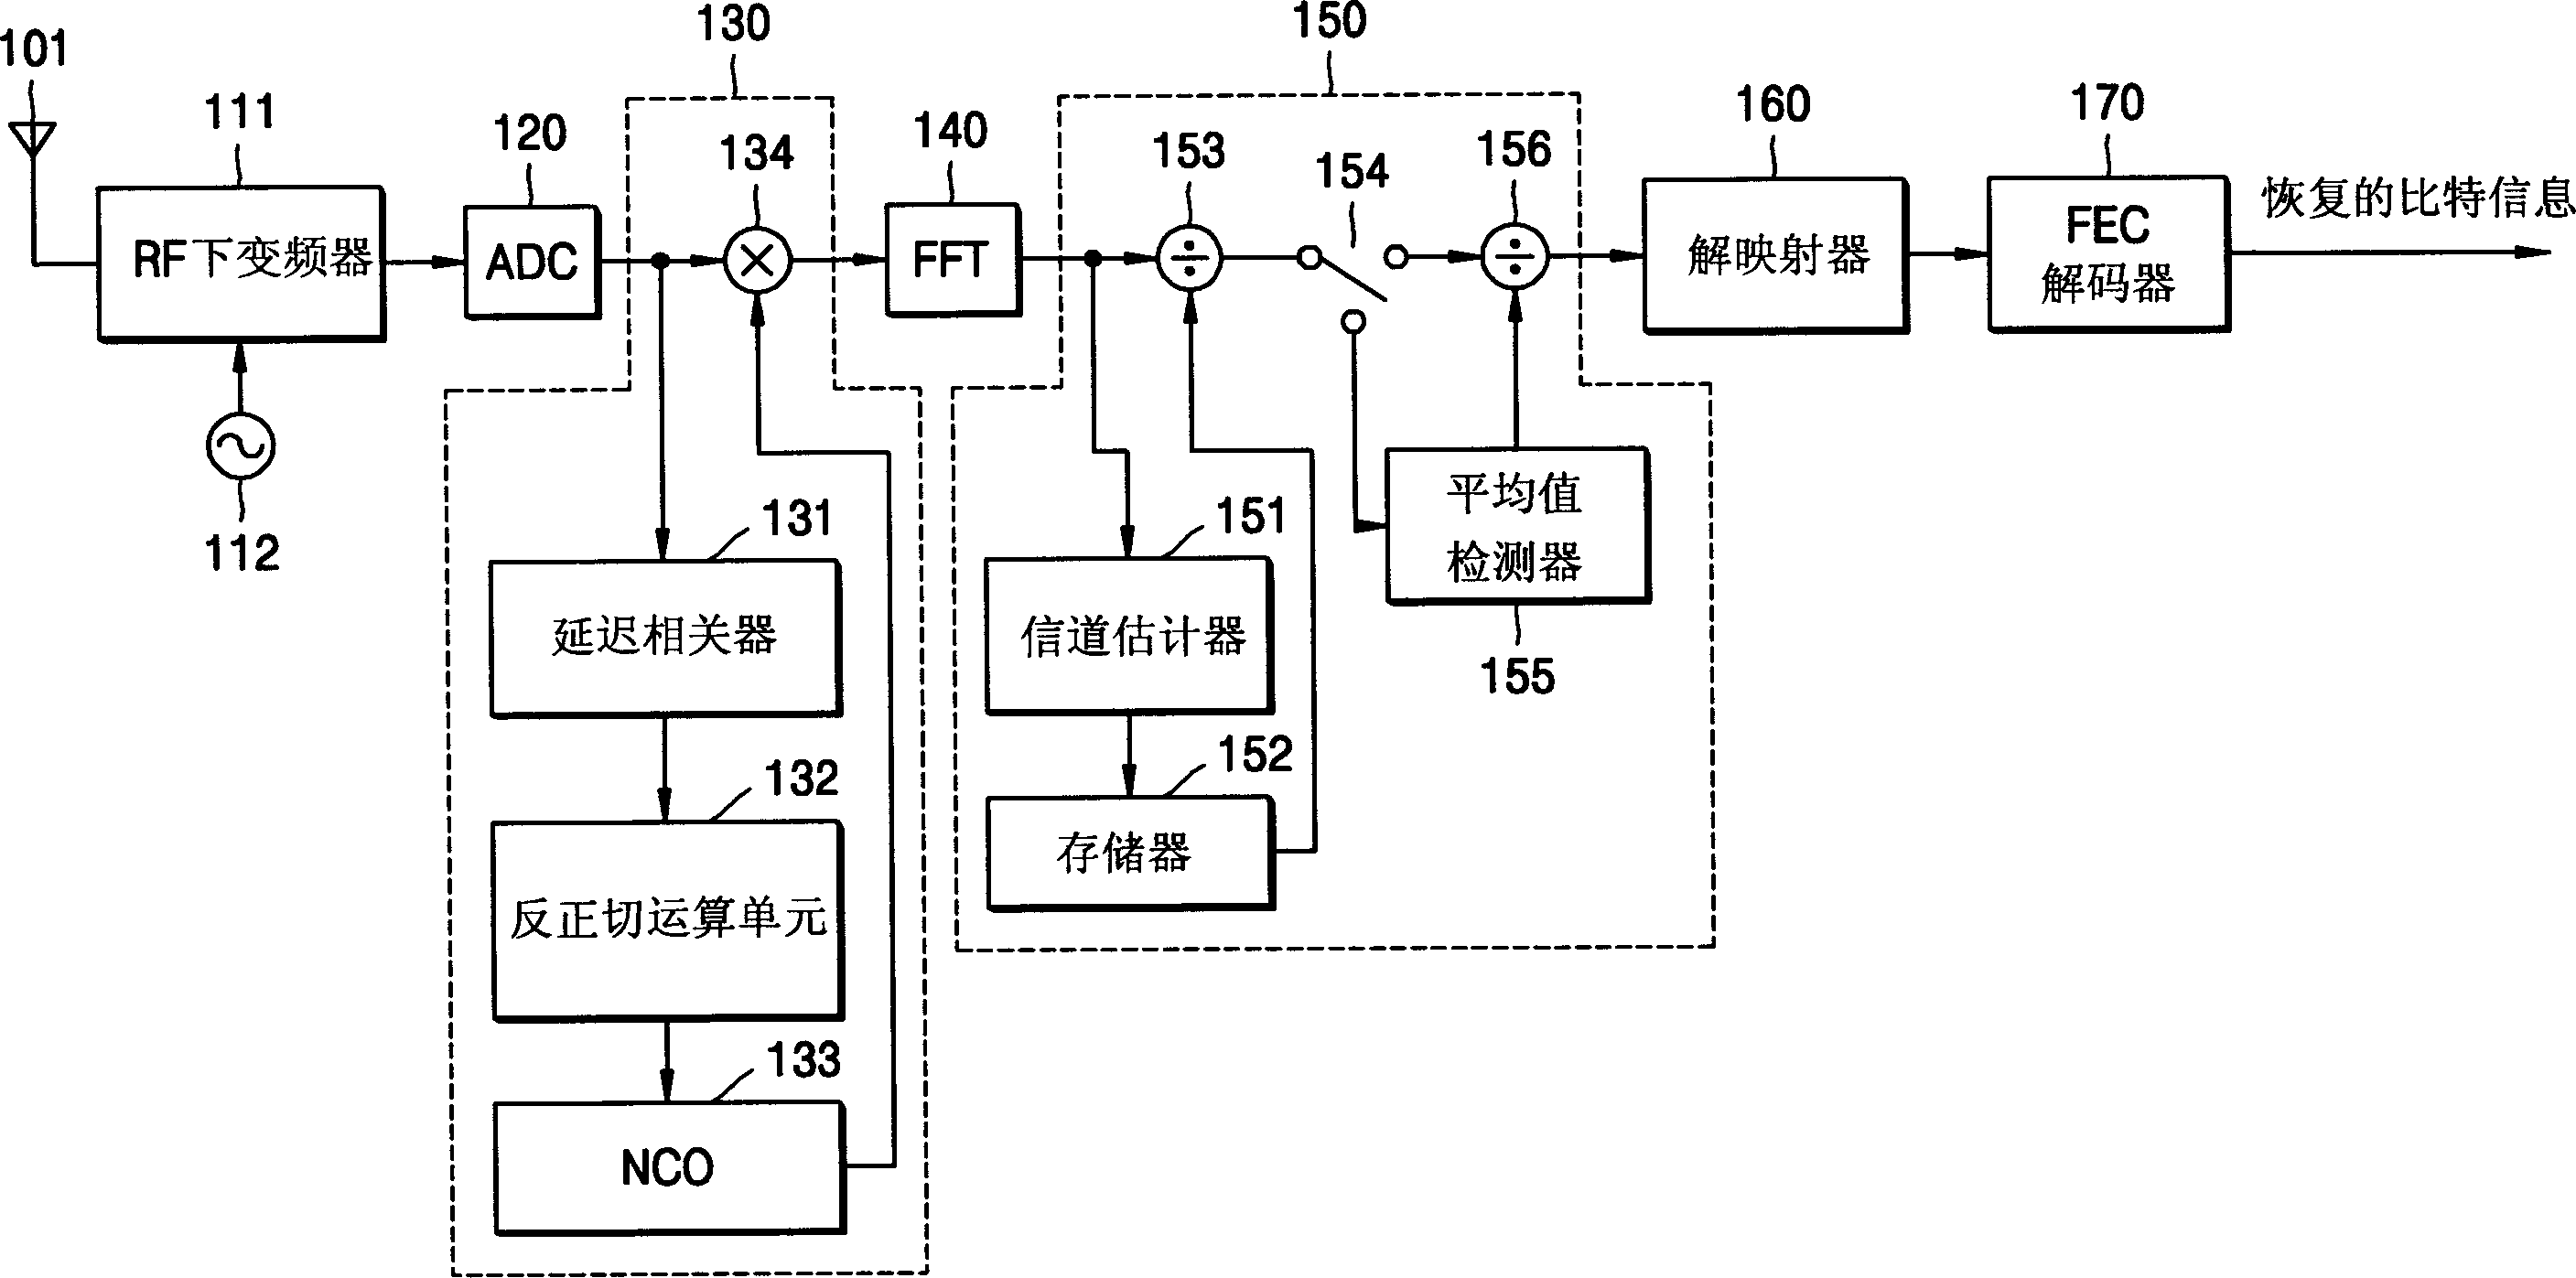 Apparatus for and method of compensation for frequency offset and channel variation in mimo-ofdm receiver